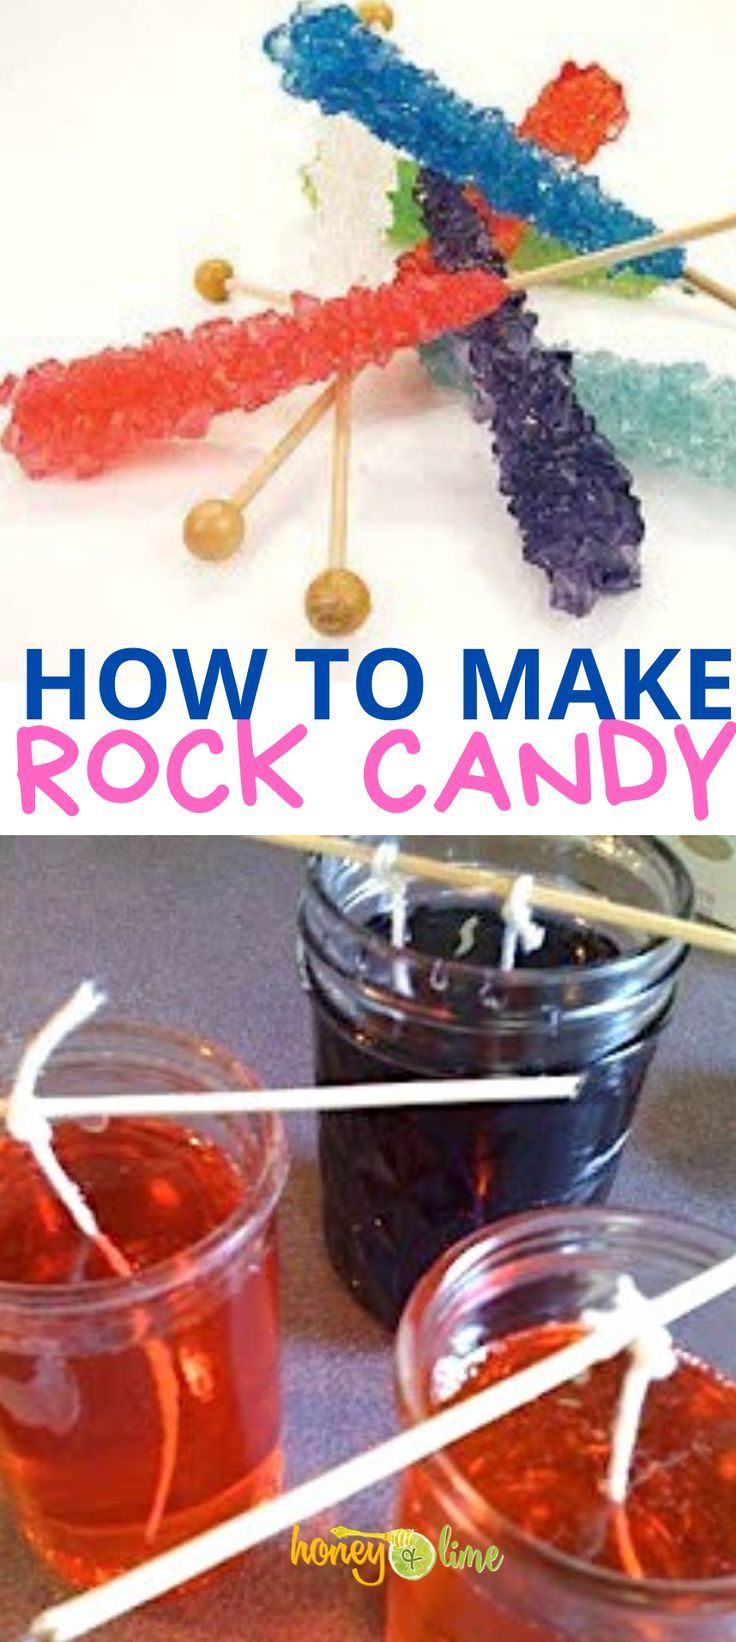 Science projects to do at home - make rock candy -   13 diy projects for kids ideas